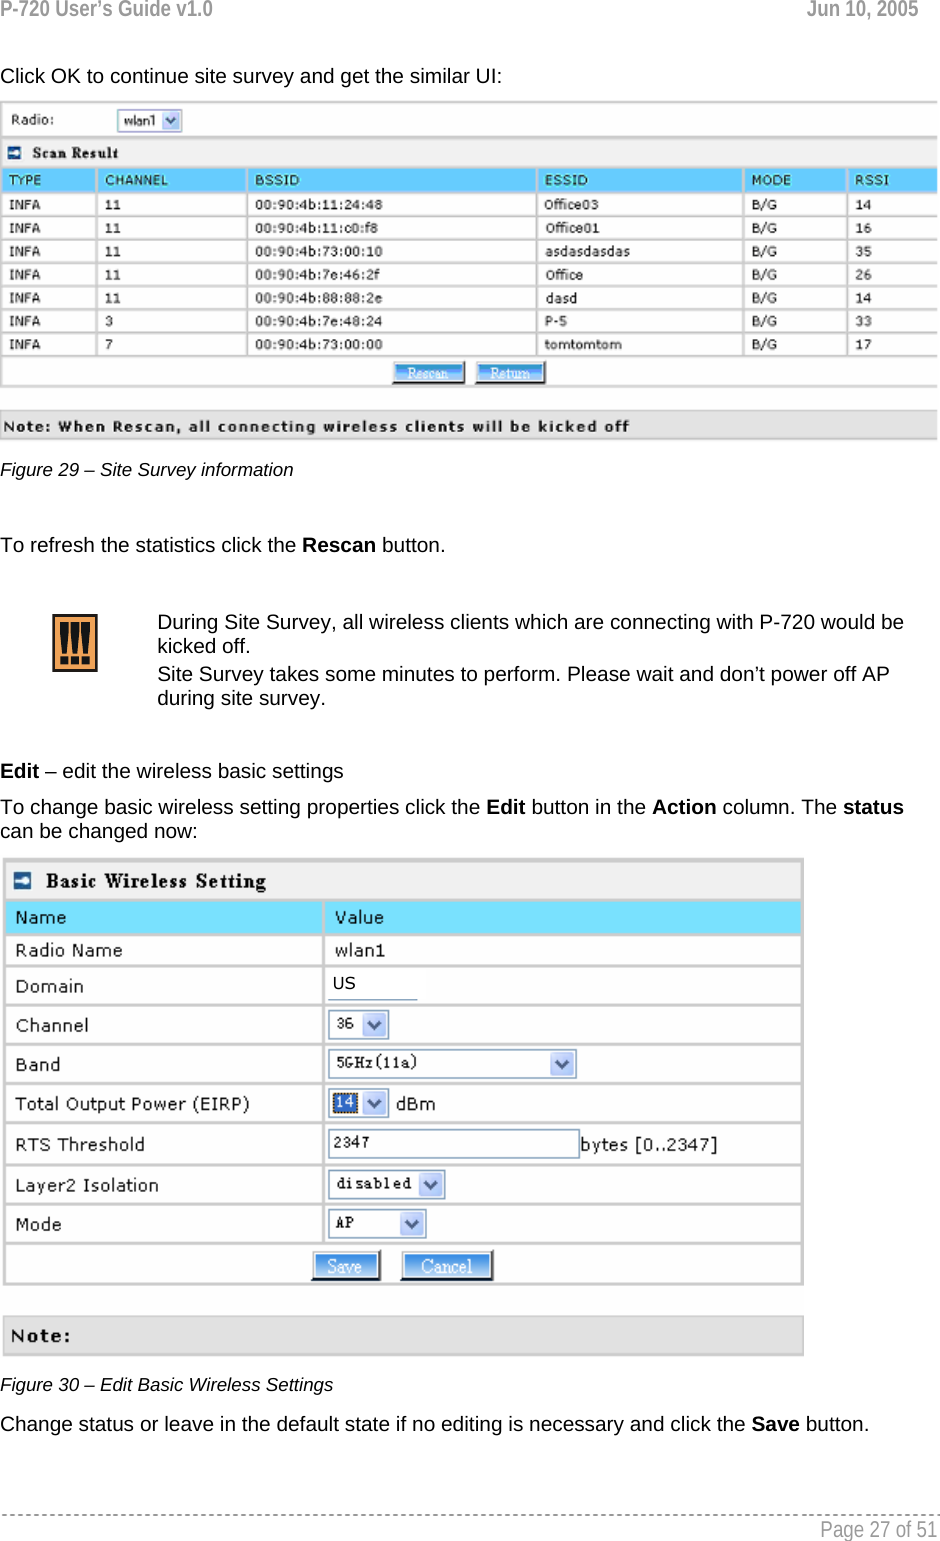 P-720 User’s Guide v1.0  Jun 10, 2005     Page 27 of 51   Click OK to continue site survey and get the similar UI:  Figure 29 – Site Survey information   To refresh the statistics click the Rescan button.   During Site Survey, all wireless clients which are connecting with P-720 would be kicked off. Site Survey takes some minutes to perform. Please wait and don’t power off AP during site survey.   Edit – edit the wireless basic settings To change basic wireless setting properties click the Edit button in the Action column. The status can be changed now:  Figure 30 – Edit Basic Wireless Settings Change status or leave in the default state if no editing is necessary and click the Save button.   US